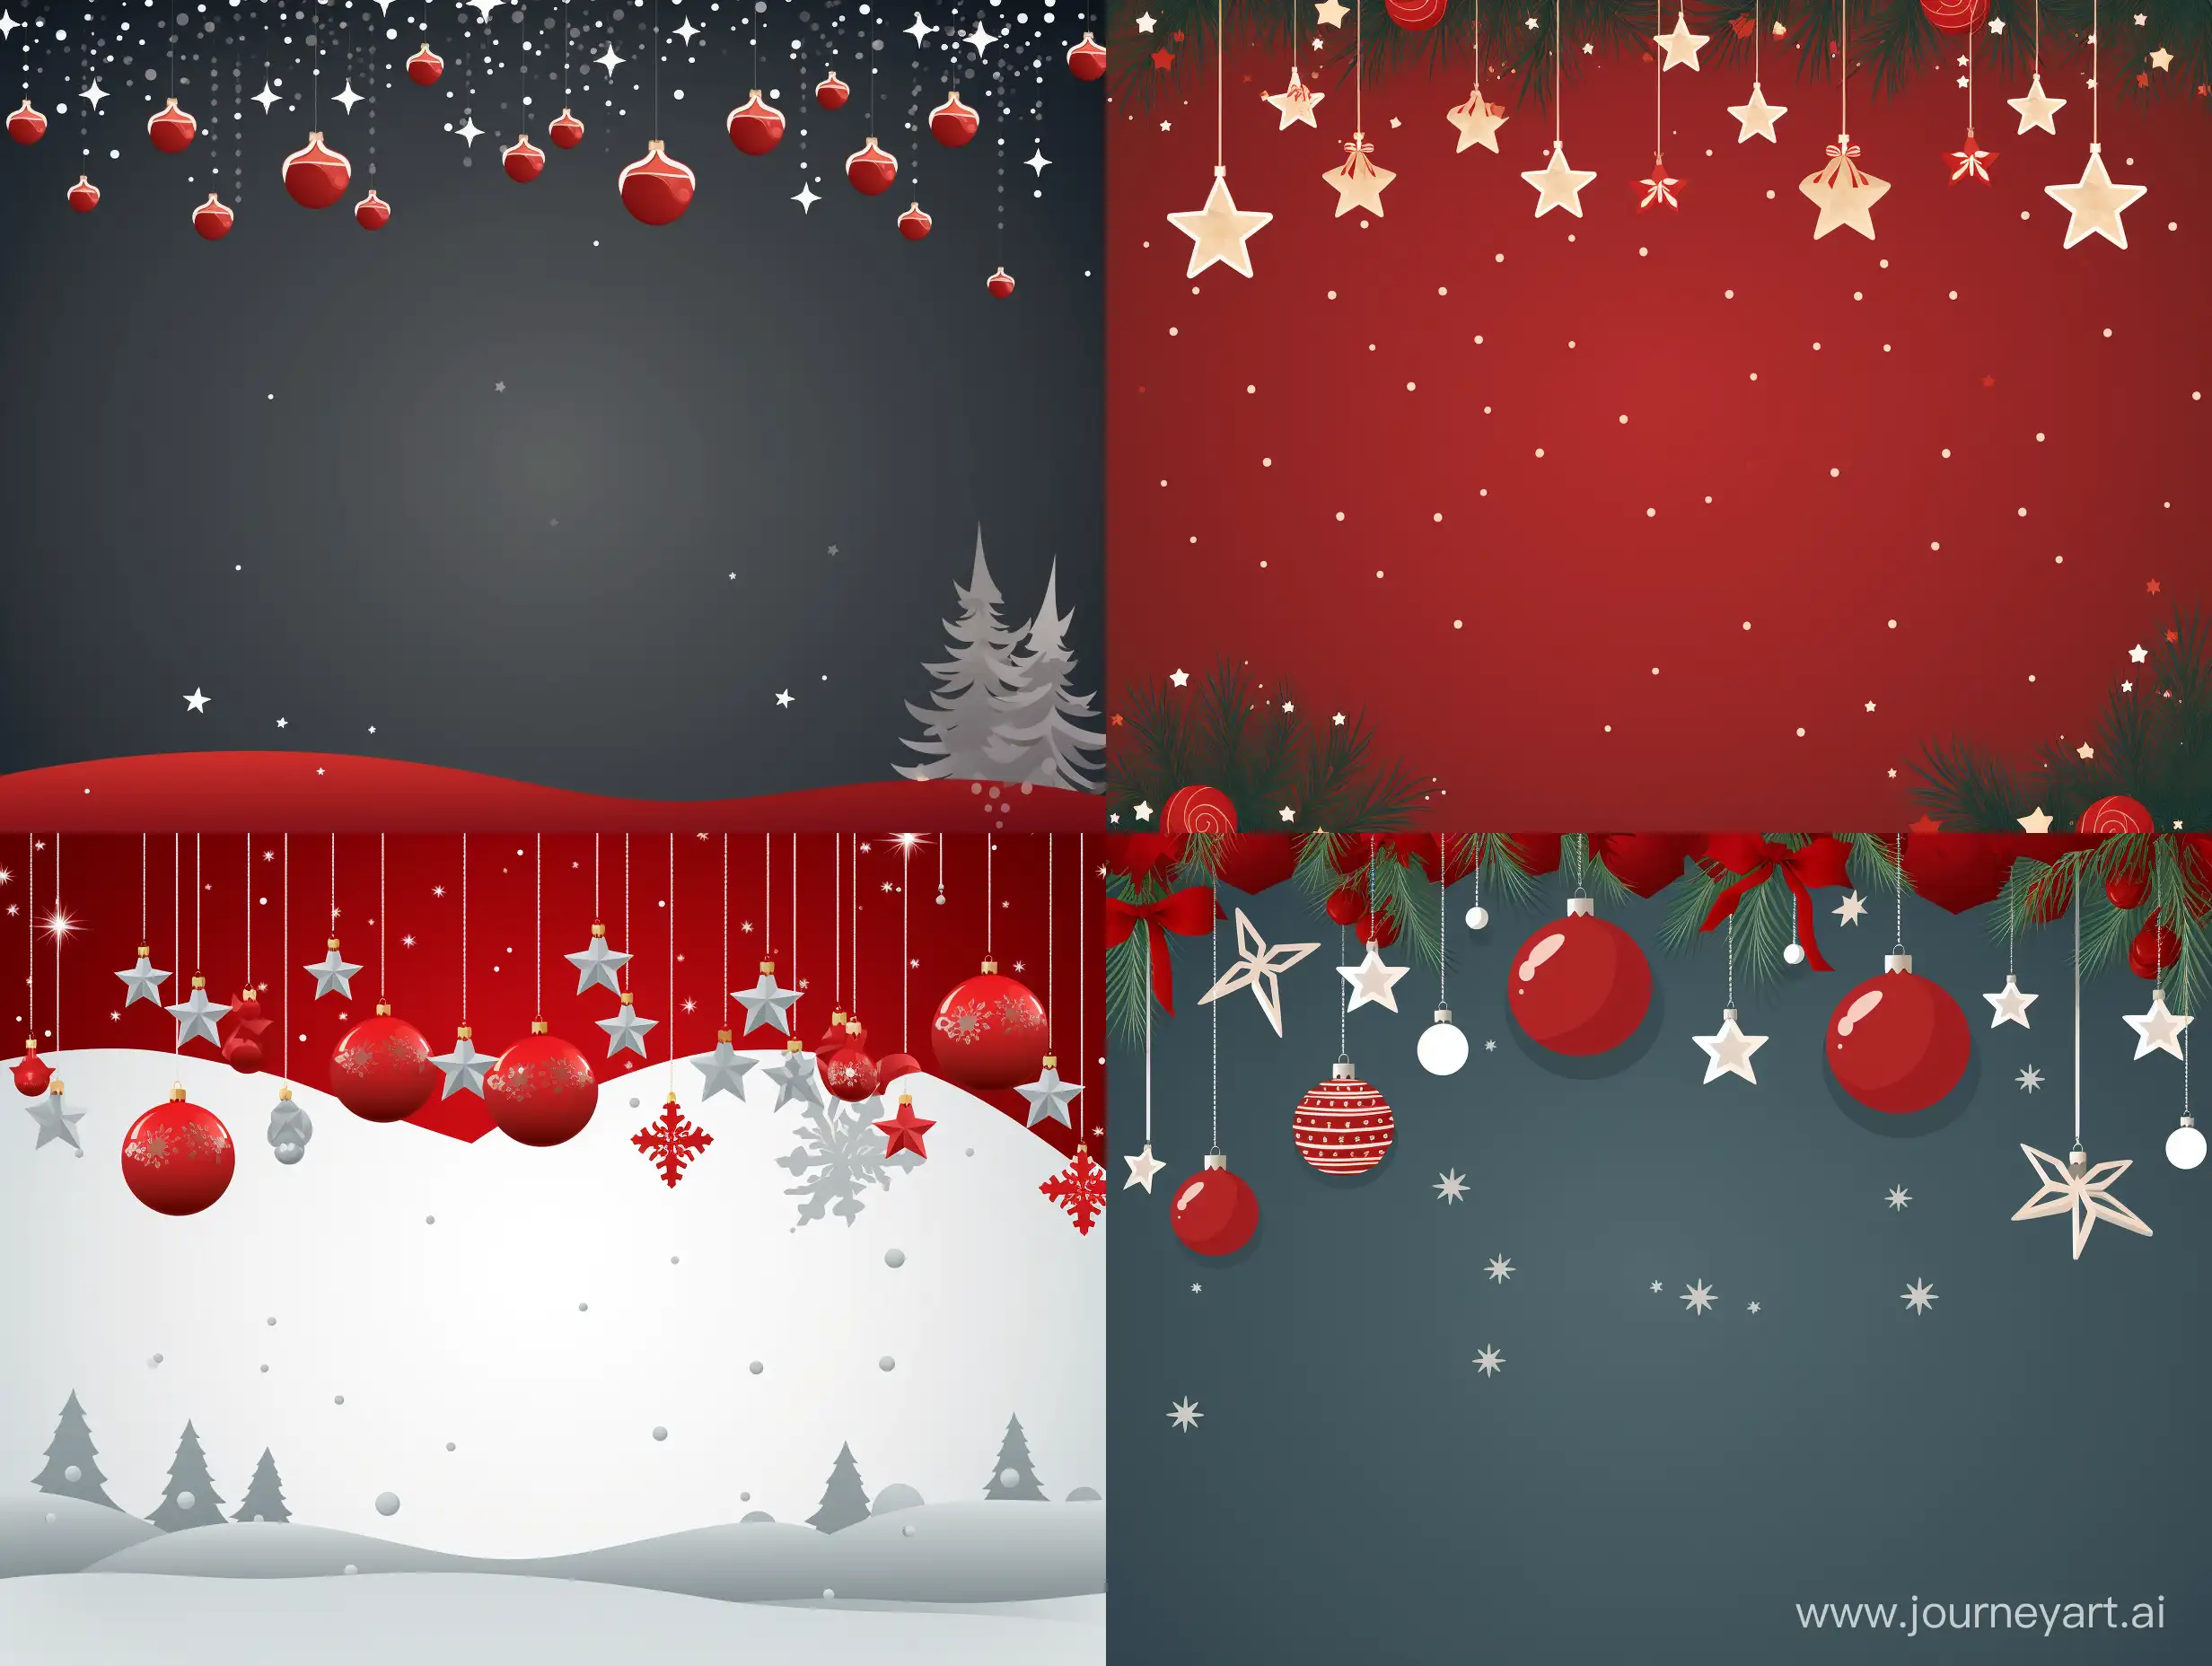 Christmas greetings card
where there is a New Year's ornament with stars, snowflakes, Christmas trees and New Year's balls
, and also where there is a place in the middle for text
, and the  greetings card should be in a modern minimal flat style
, and also the background should be Christmas red color
, and there should also be Christmas gifts at the bottom